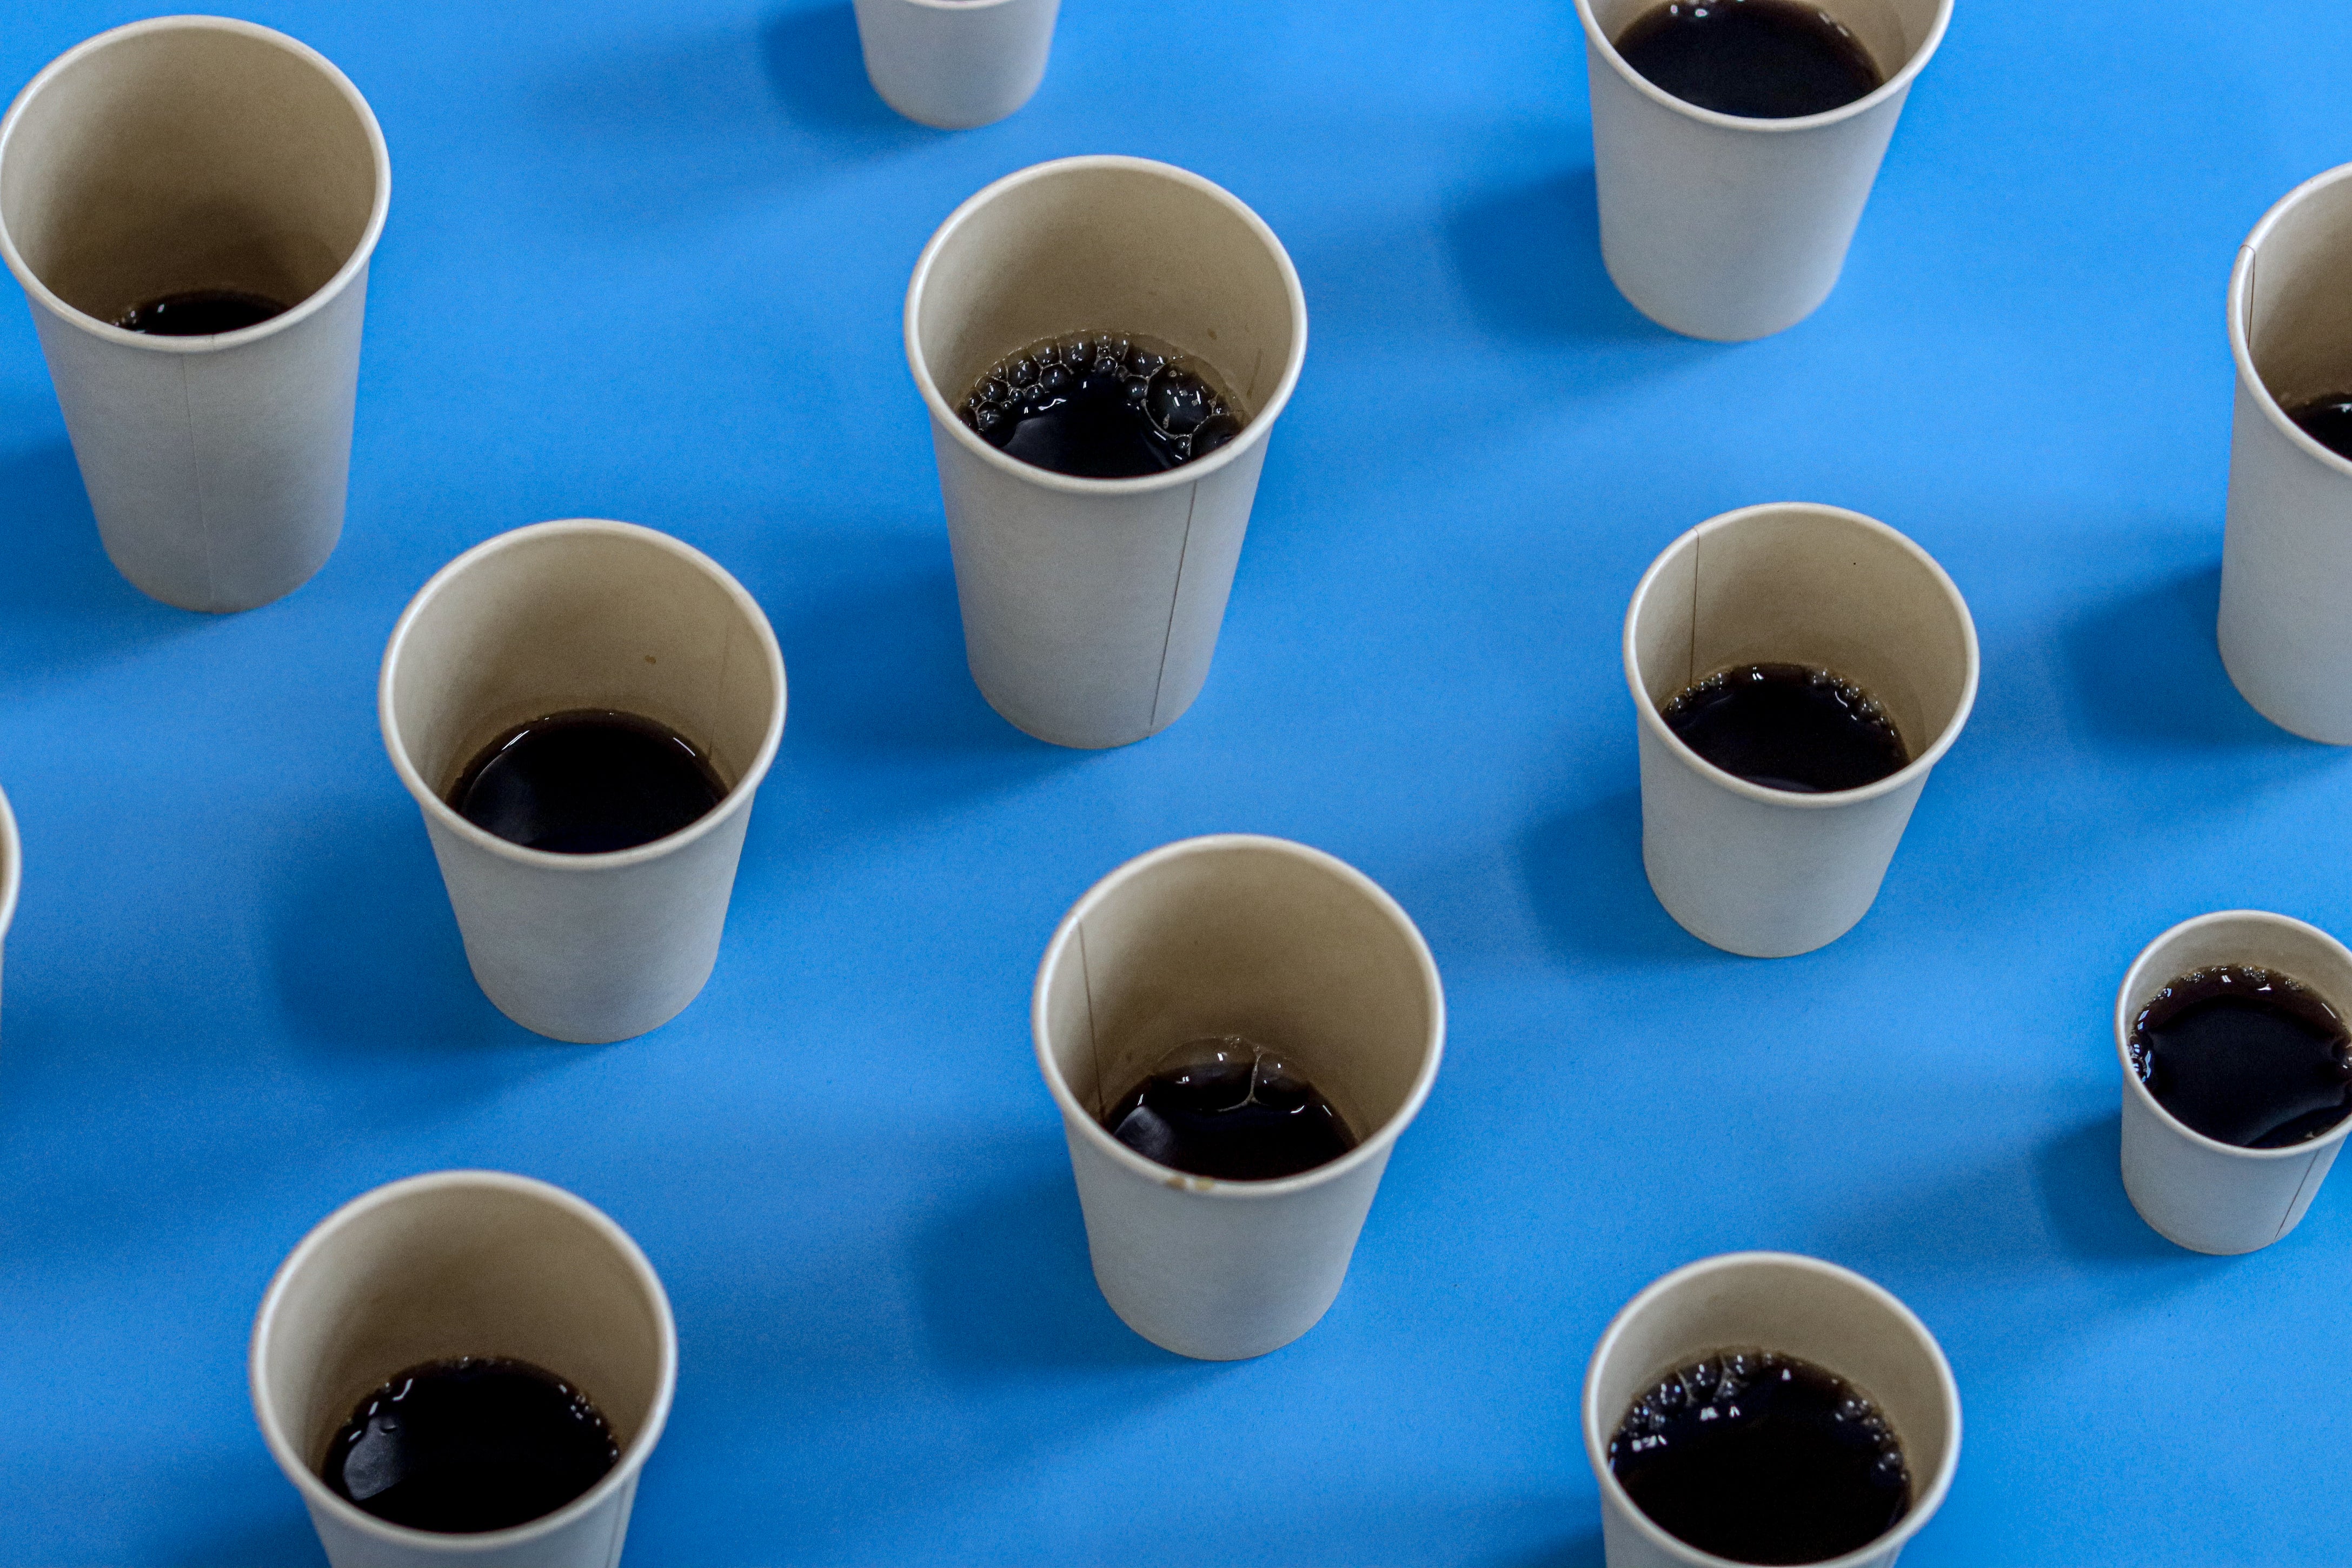 The image shows several bamboo takeaway cups filled with dark coffee, arranged on a blue background.